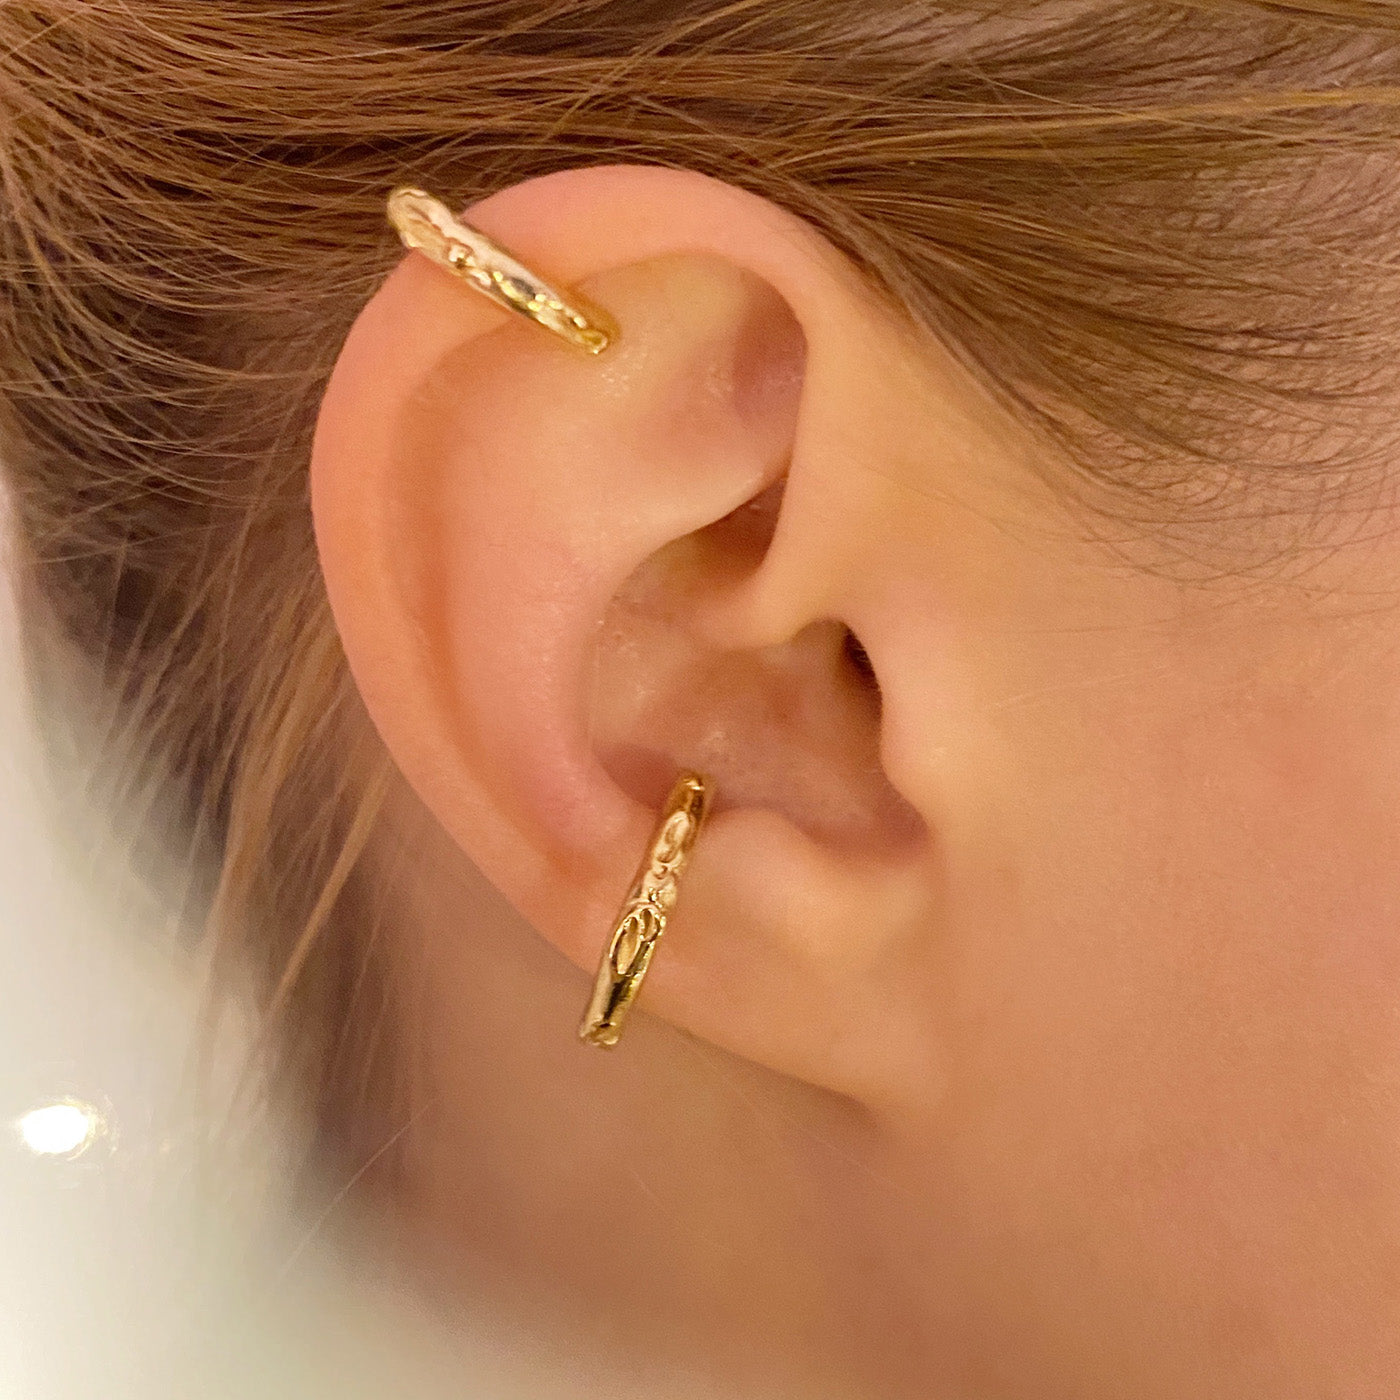 ear cuff cenote gold silver 18ct gold plated product view innan jewellery independent atelier berlin in stock